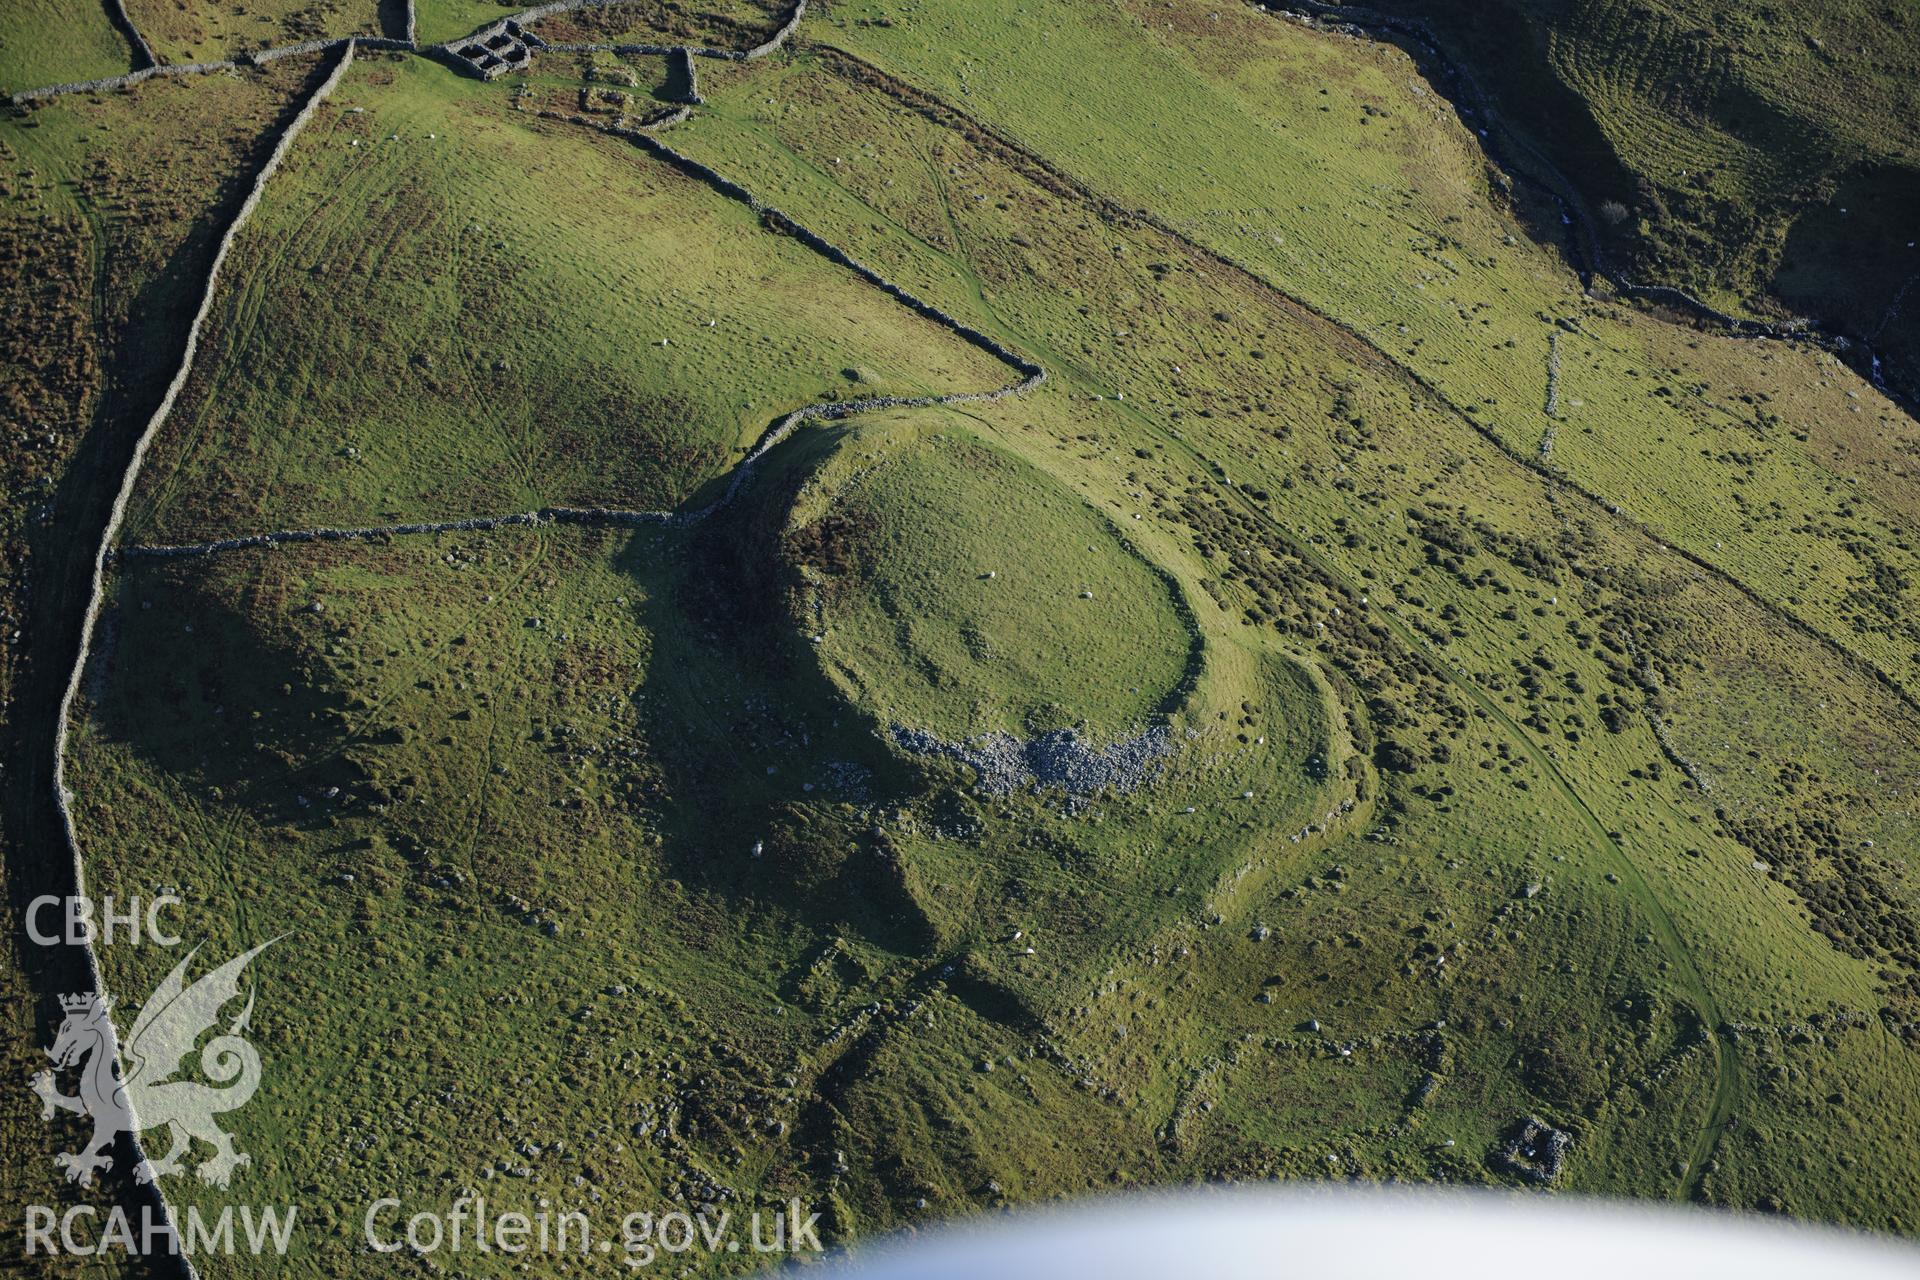 RCAHMW colour oblique photograph of Pen y Dinas hillfort. Taken by Toby Driver on 10/12/2012.